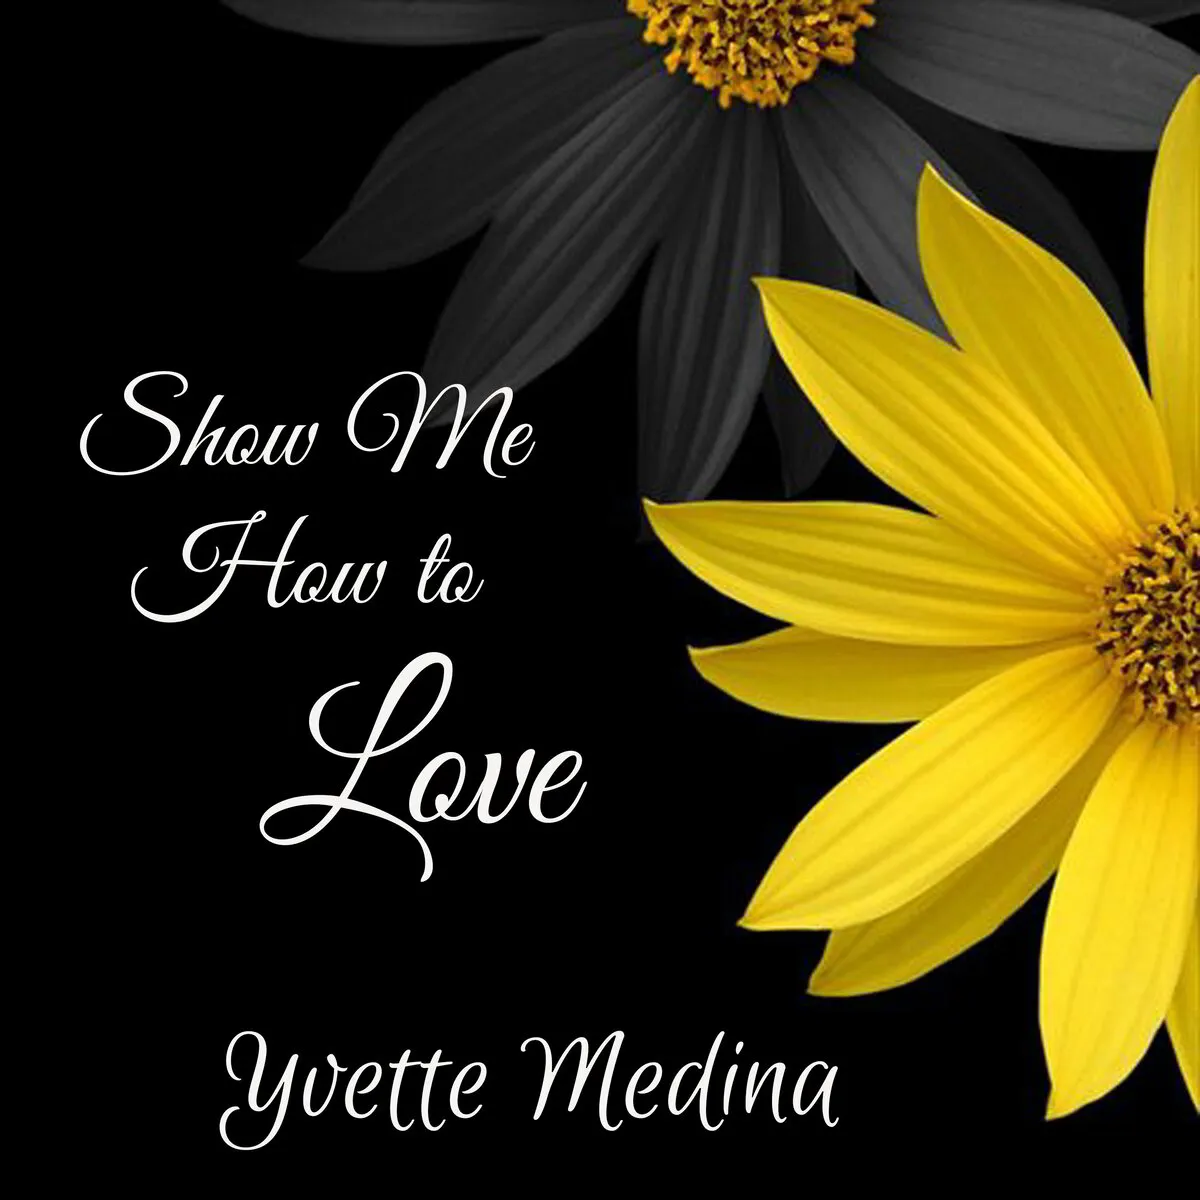 Show Me How To Love"